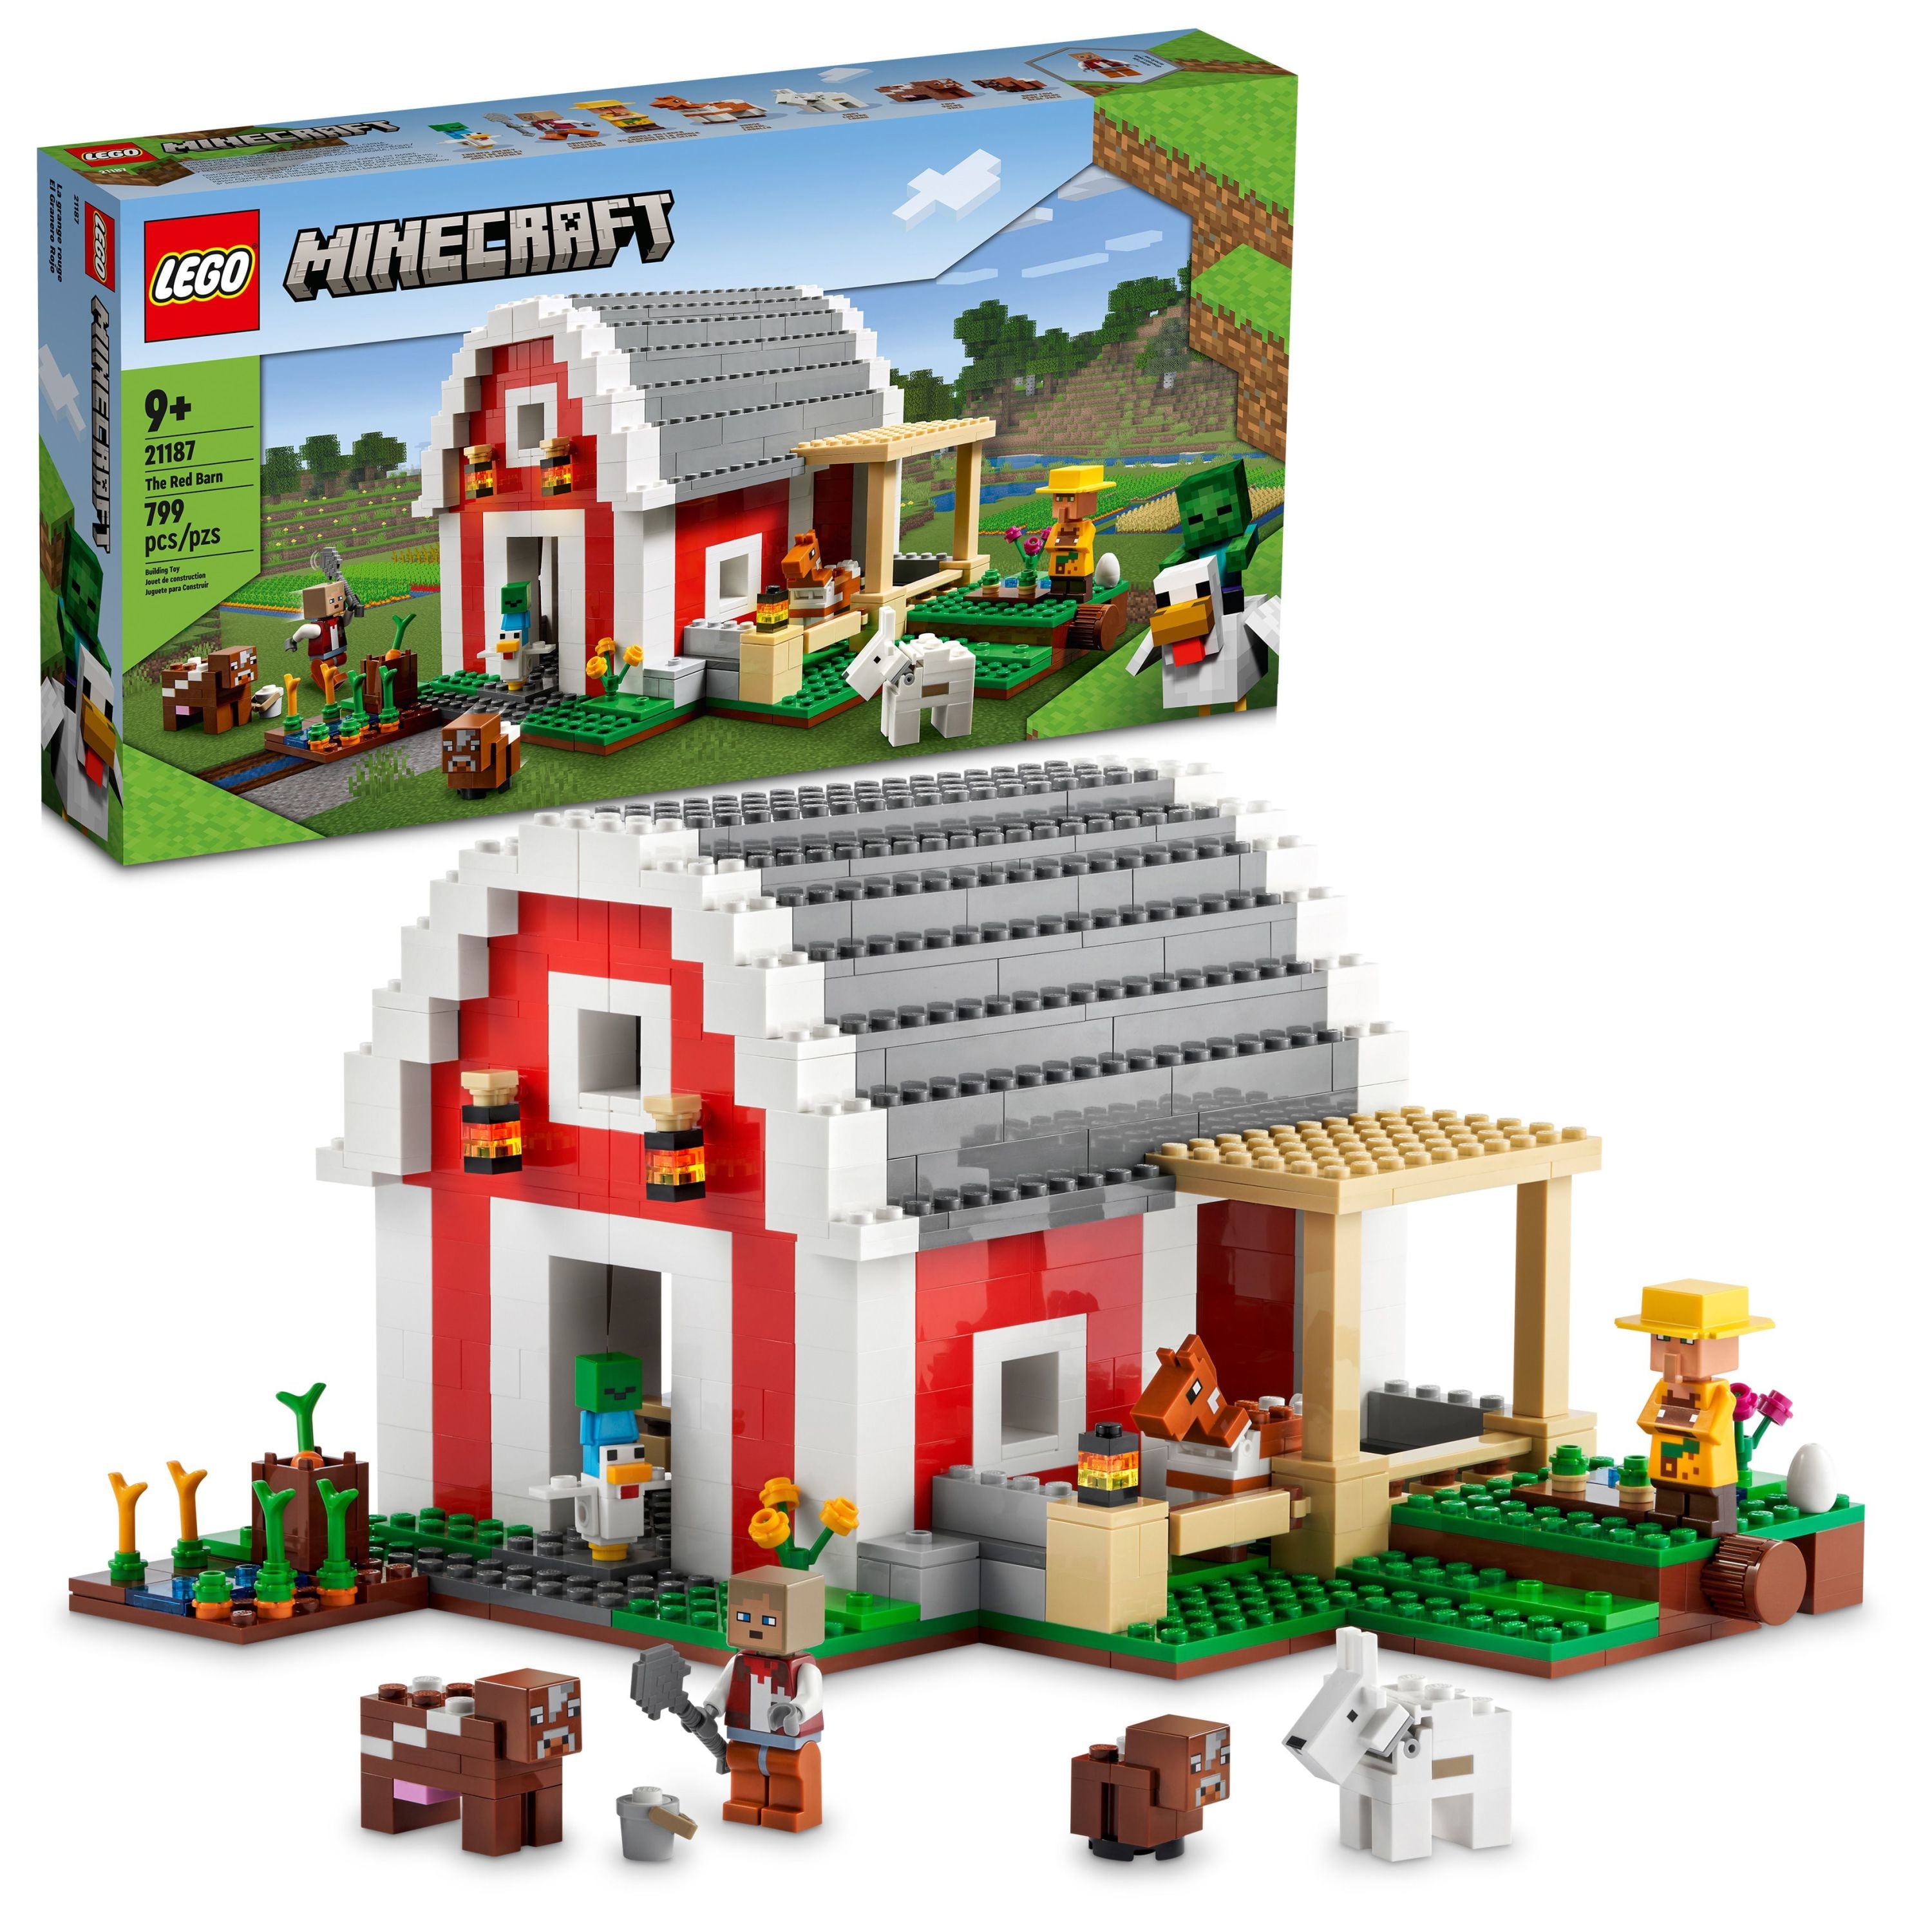 bypass accent binde LEGO Minecraft The Red Barn Farm House Toy 21187 with Villager and Zombie  Figure Plus Goat, Cow & Horse Animal Figures for Kids - Walmart.com